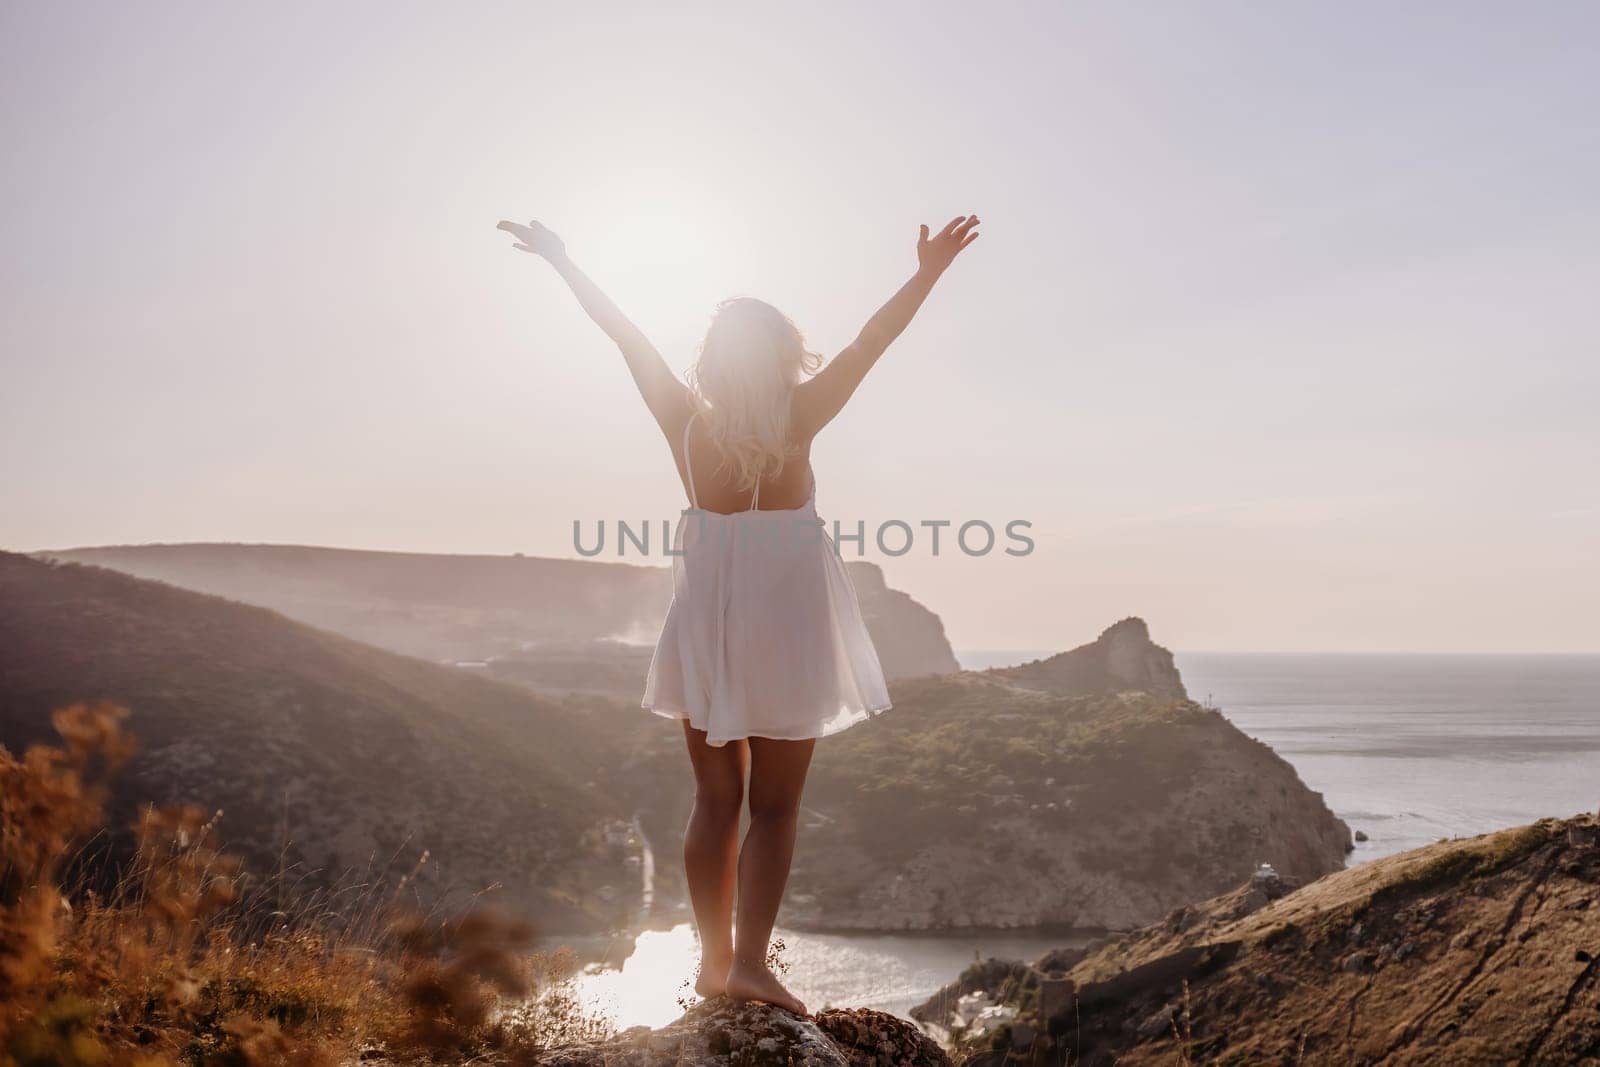 A woman is standing on a hill overlooking a body of water. She is wearing a white dress and she is happy